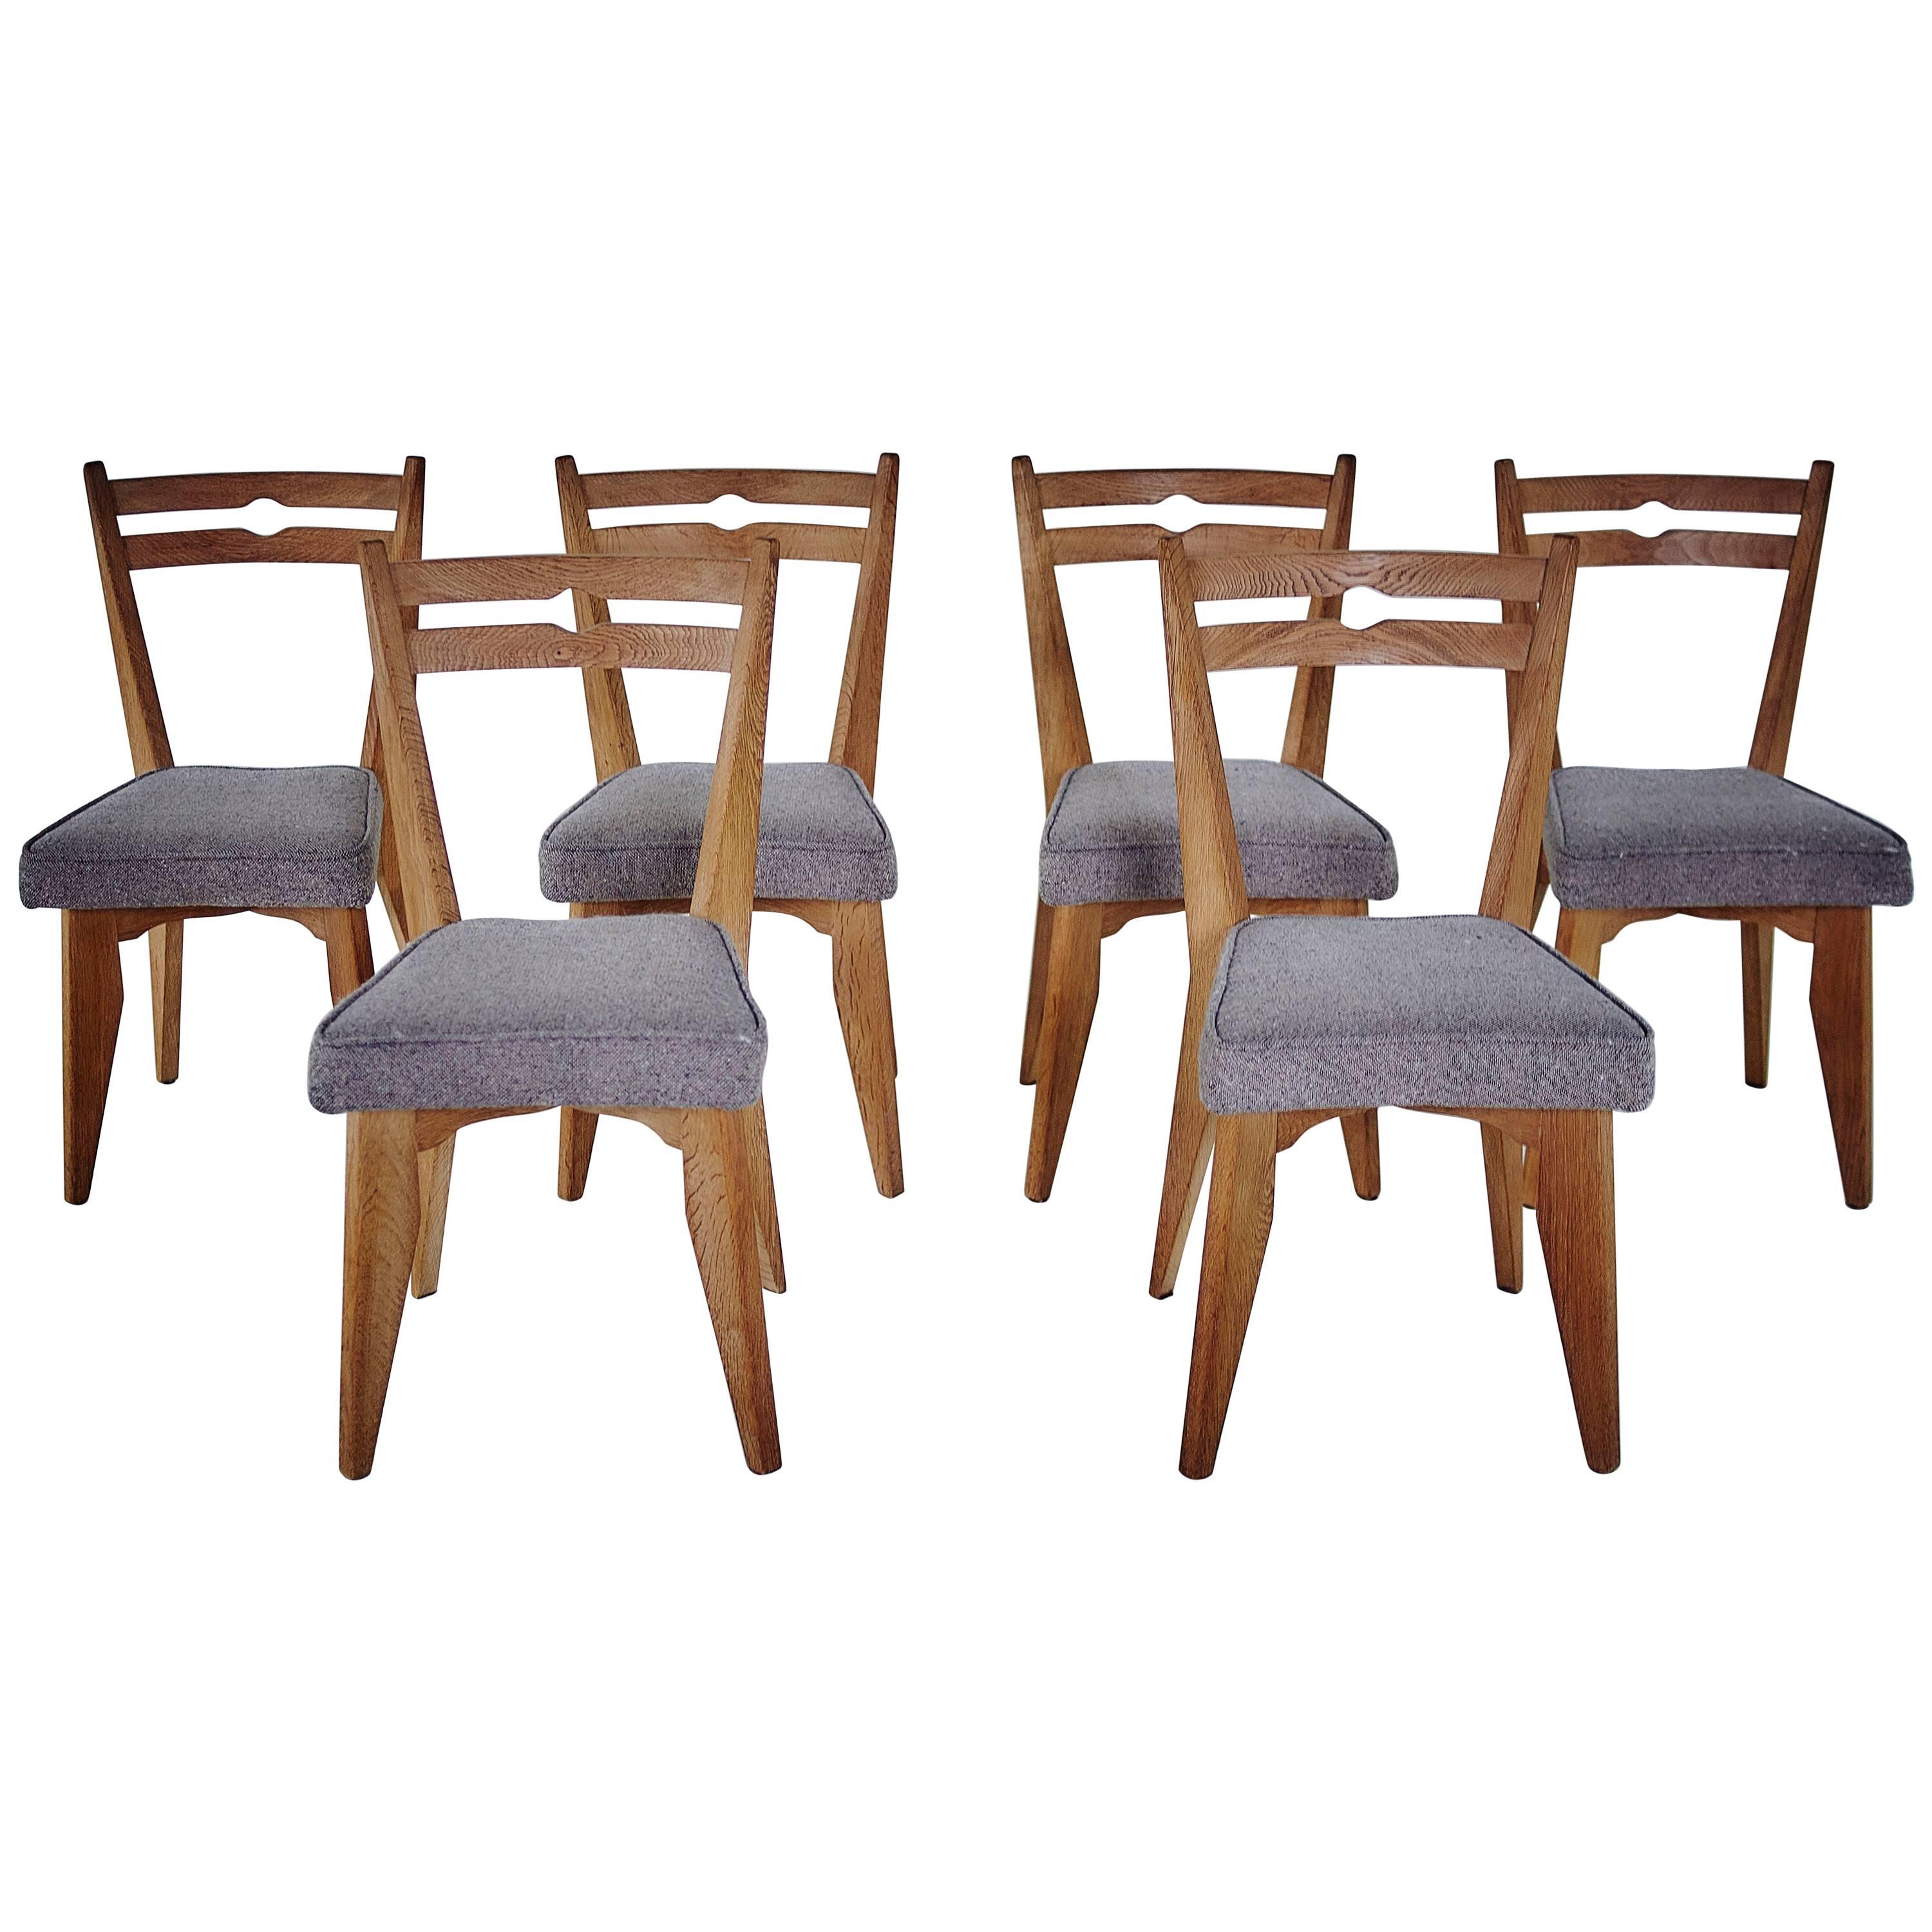 Guillerme & Chambron Set of Six Thibault Chairs, circa 1960 For Sale